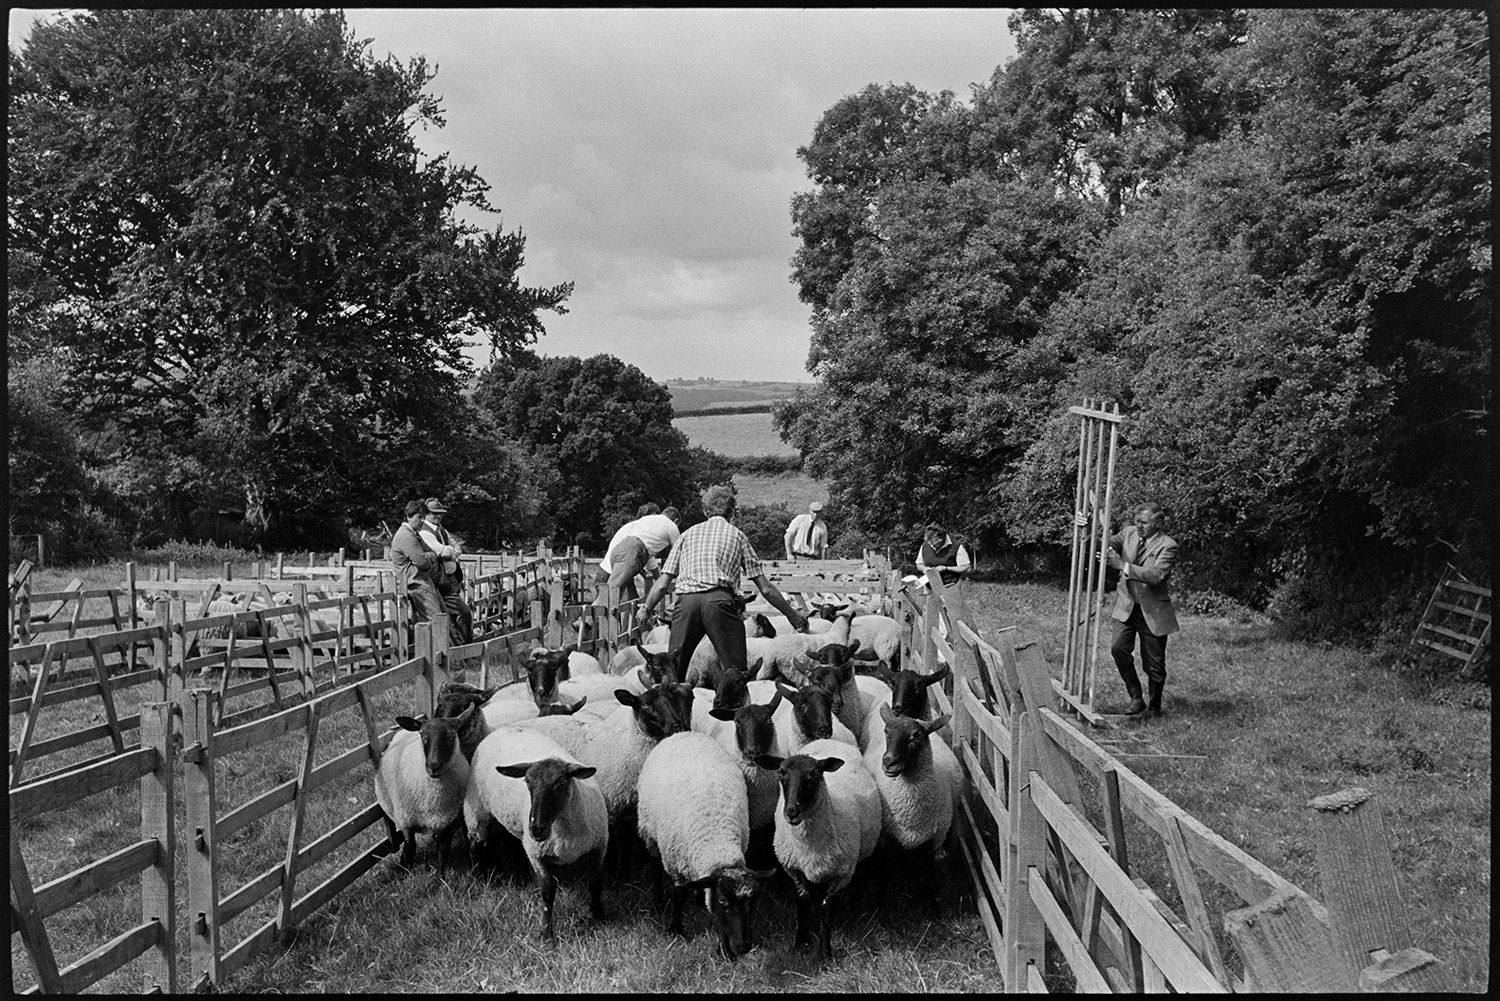 Chulmleigh Fair, sheep being penned before sale.
[A group of men herding black faced sheep into wooden pens in a field near Chulmleigh which is surrounded by trees. They are being put into pens prior to a sale during Chulmleigh Fair.]